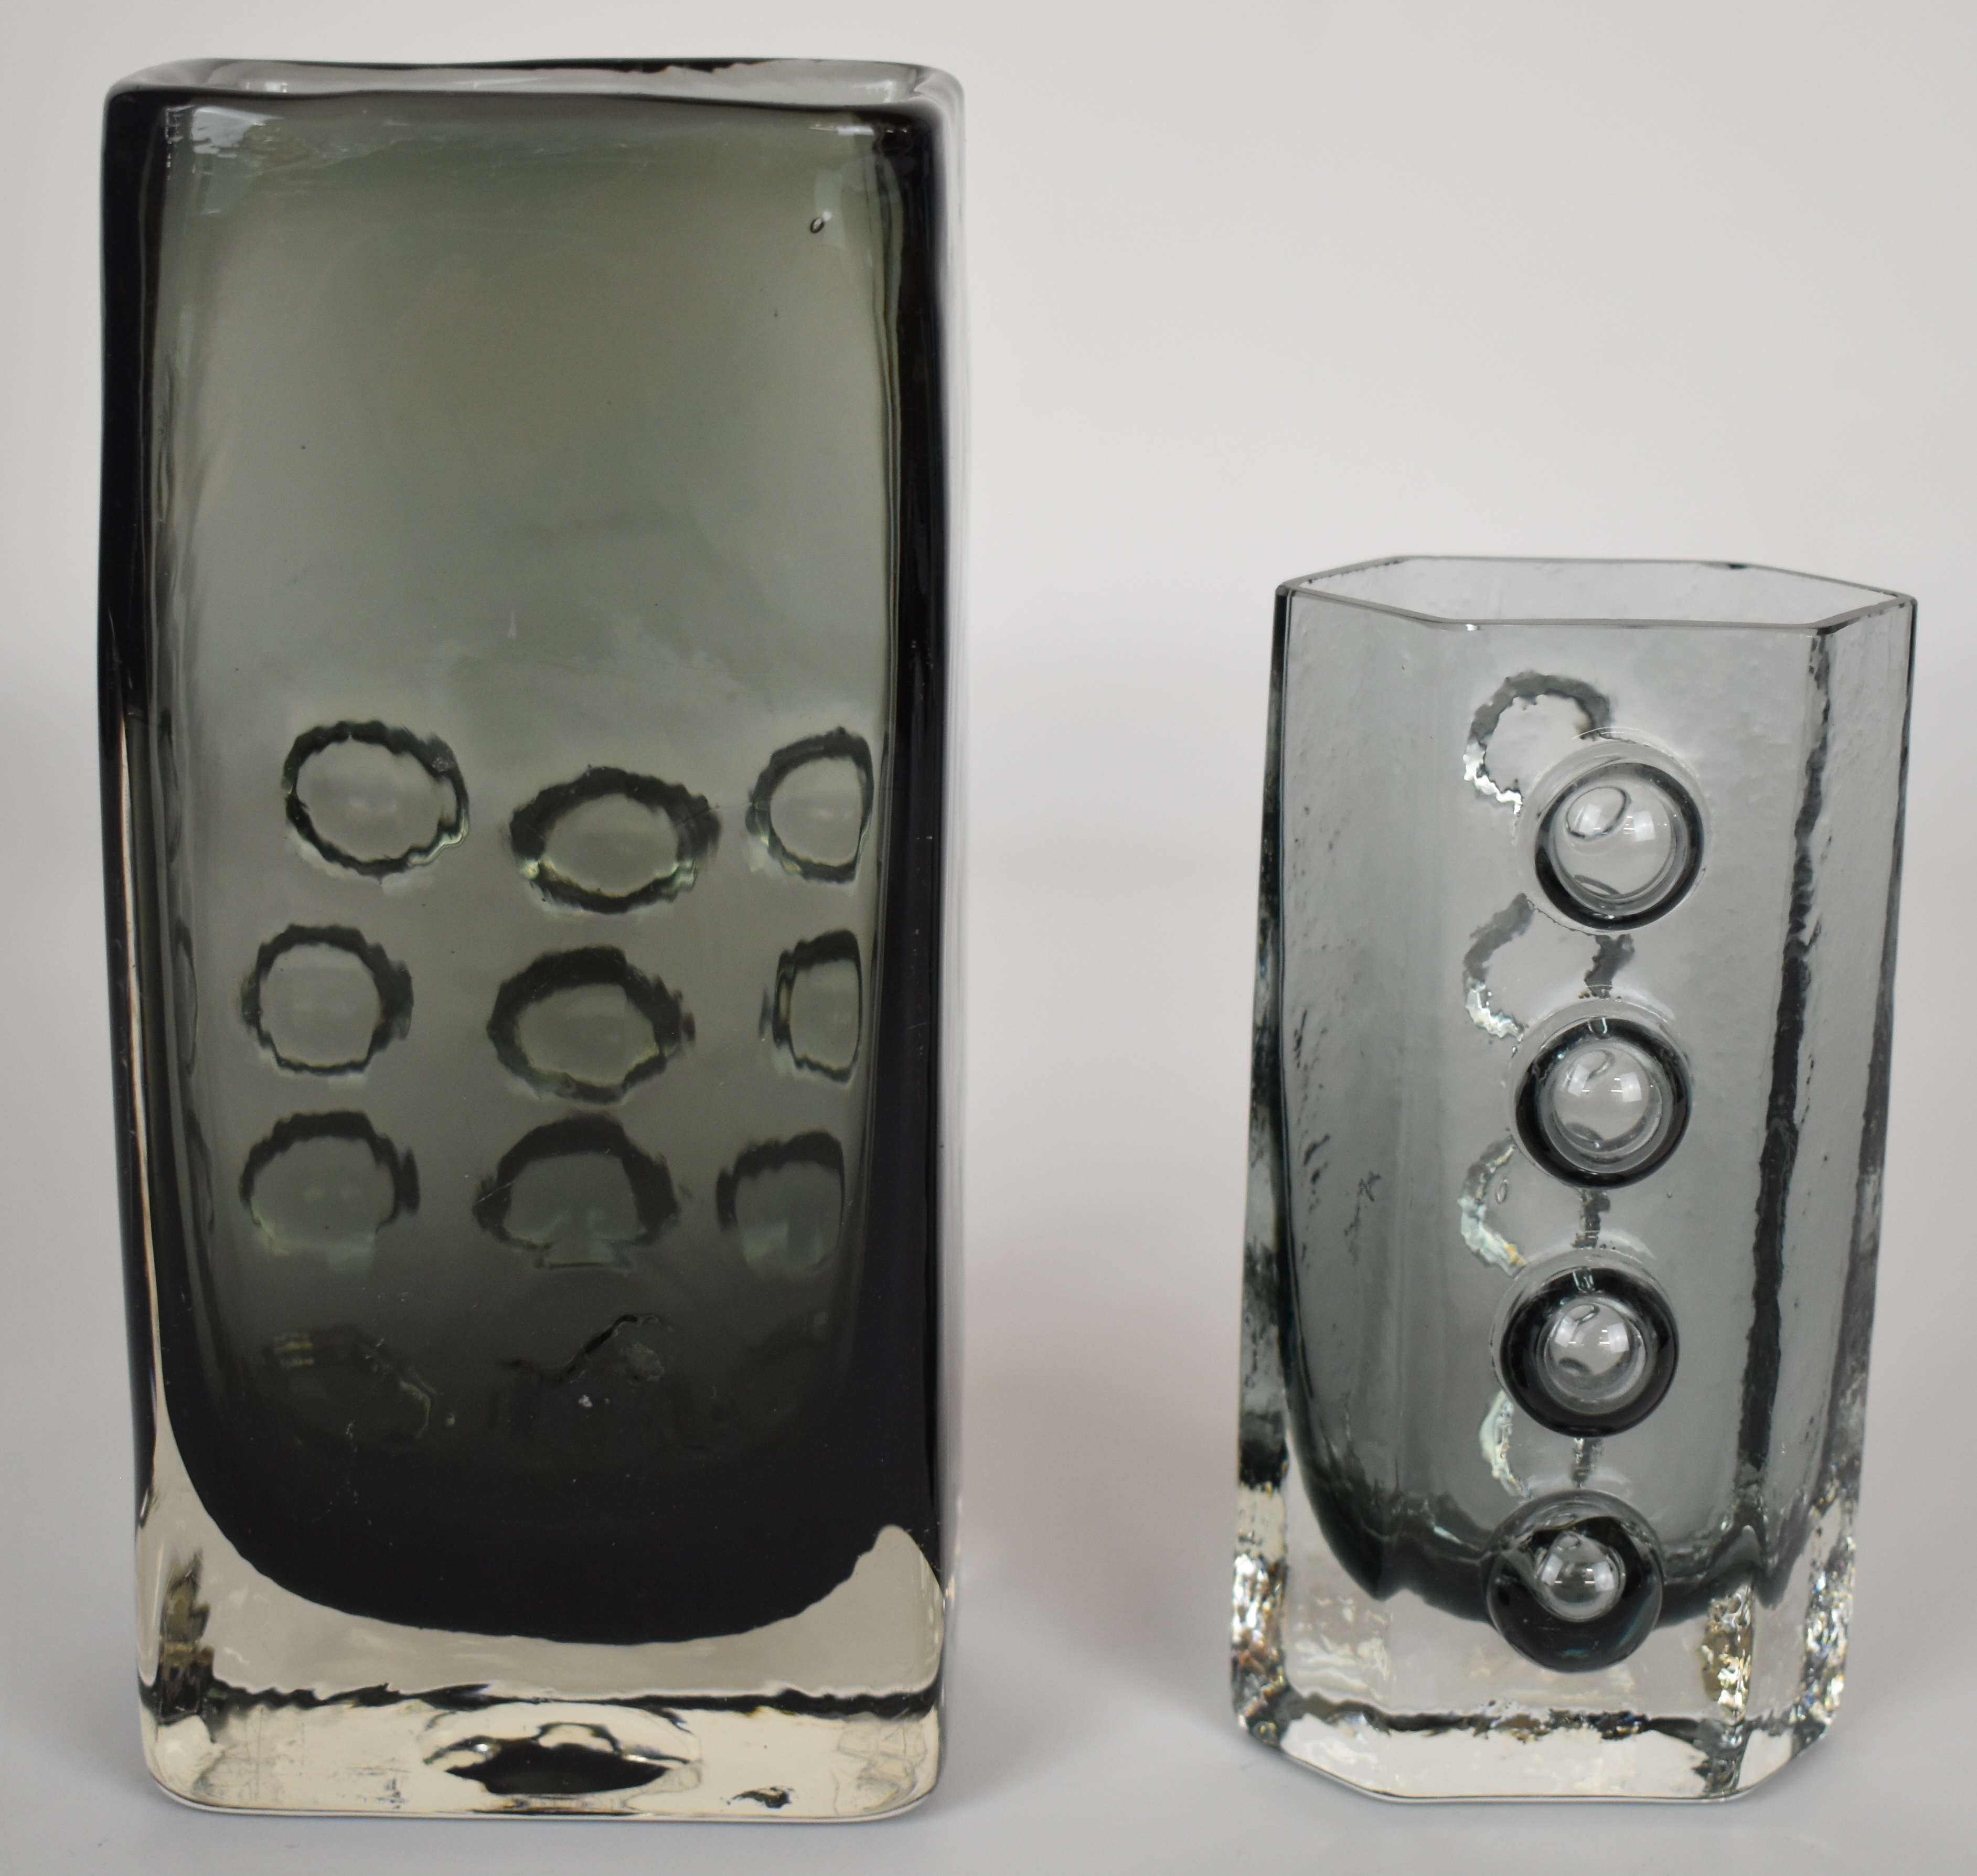 Two Geoffrey Baxter for Whitefriars textured Mobile Phone vases in pewter grey, largest 17cm tall. - Image 4 of 4